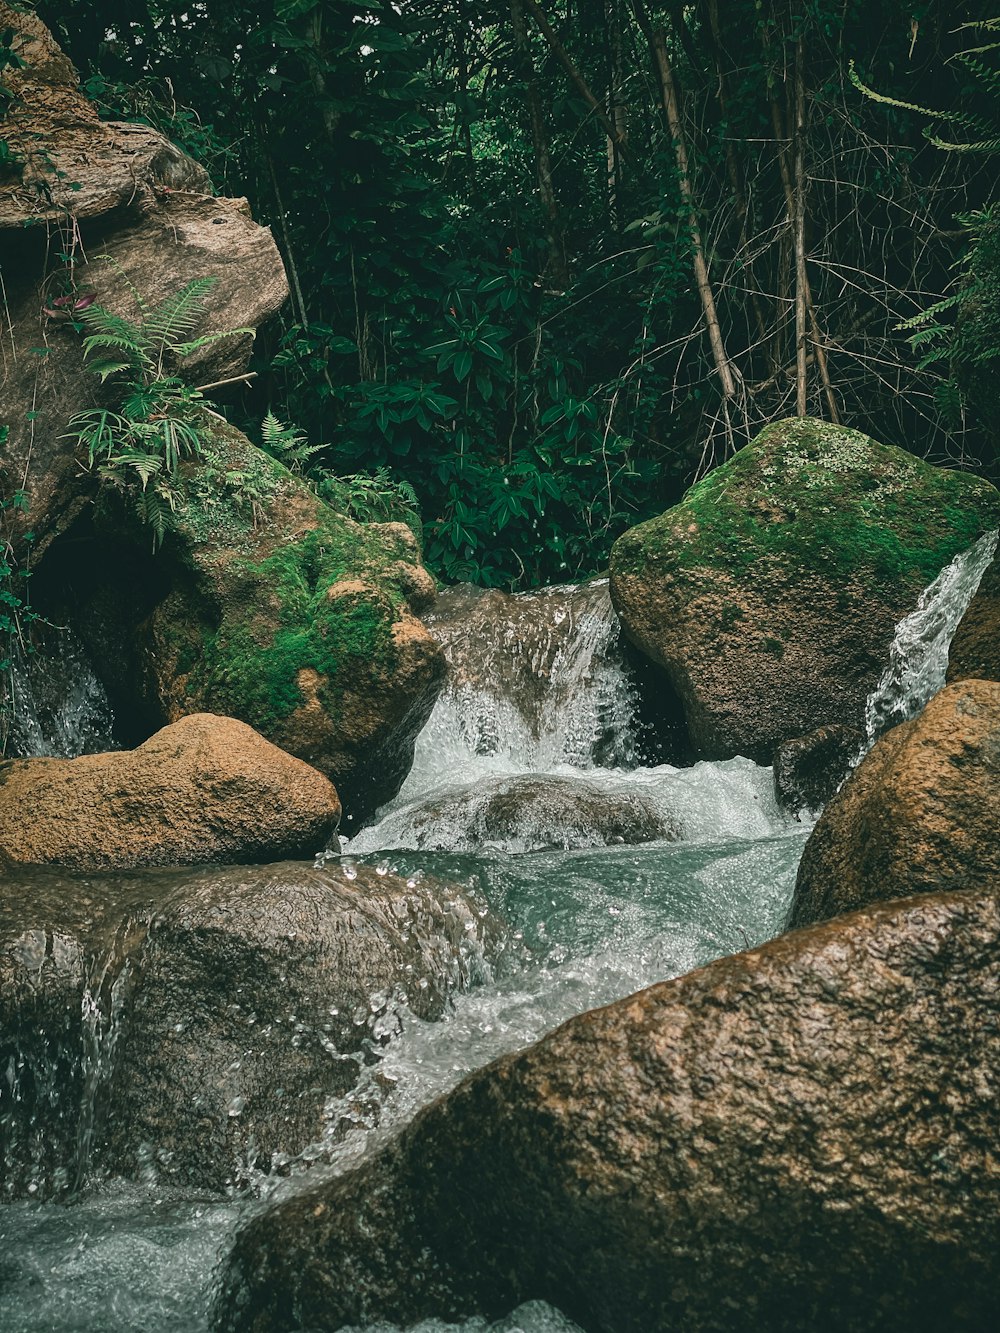 water falls between brown rocks and green trees during daytime